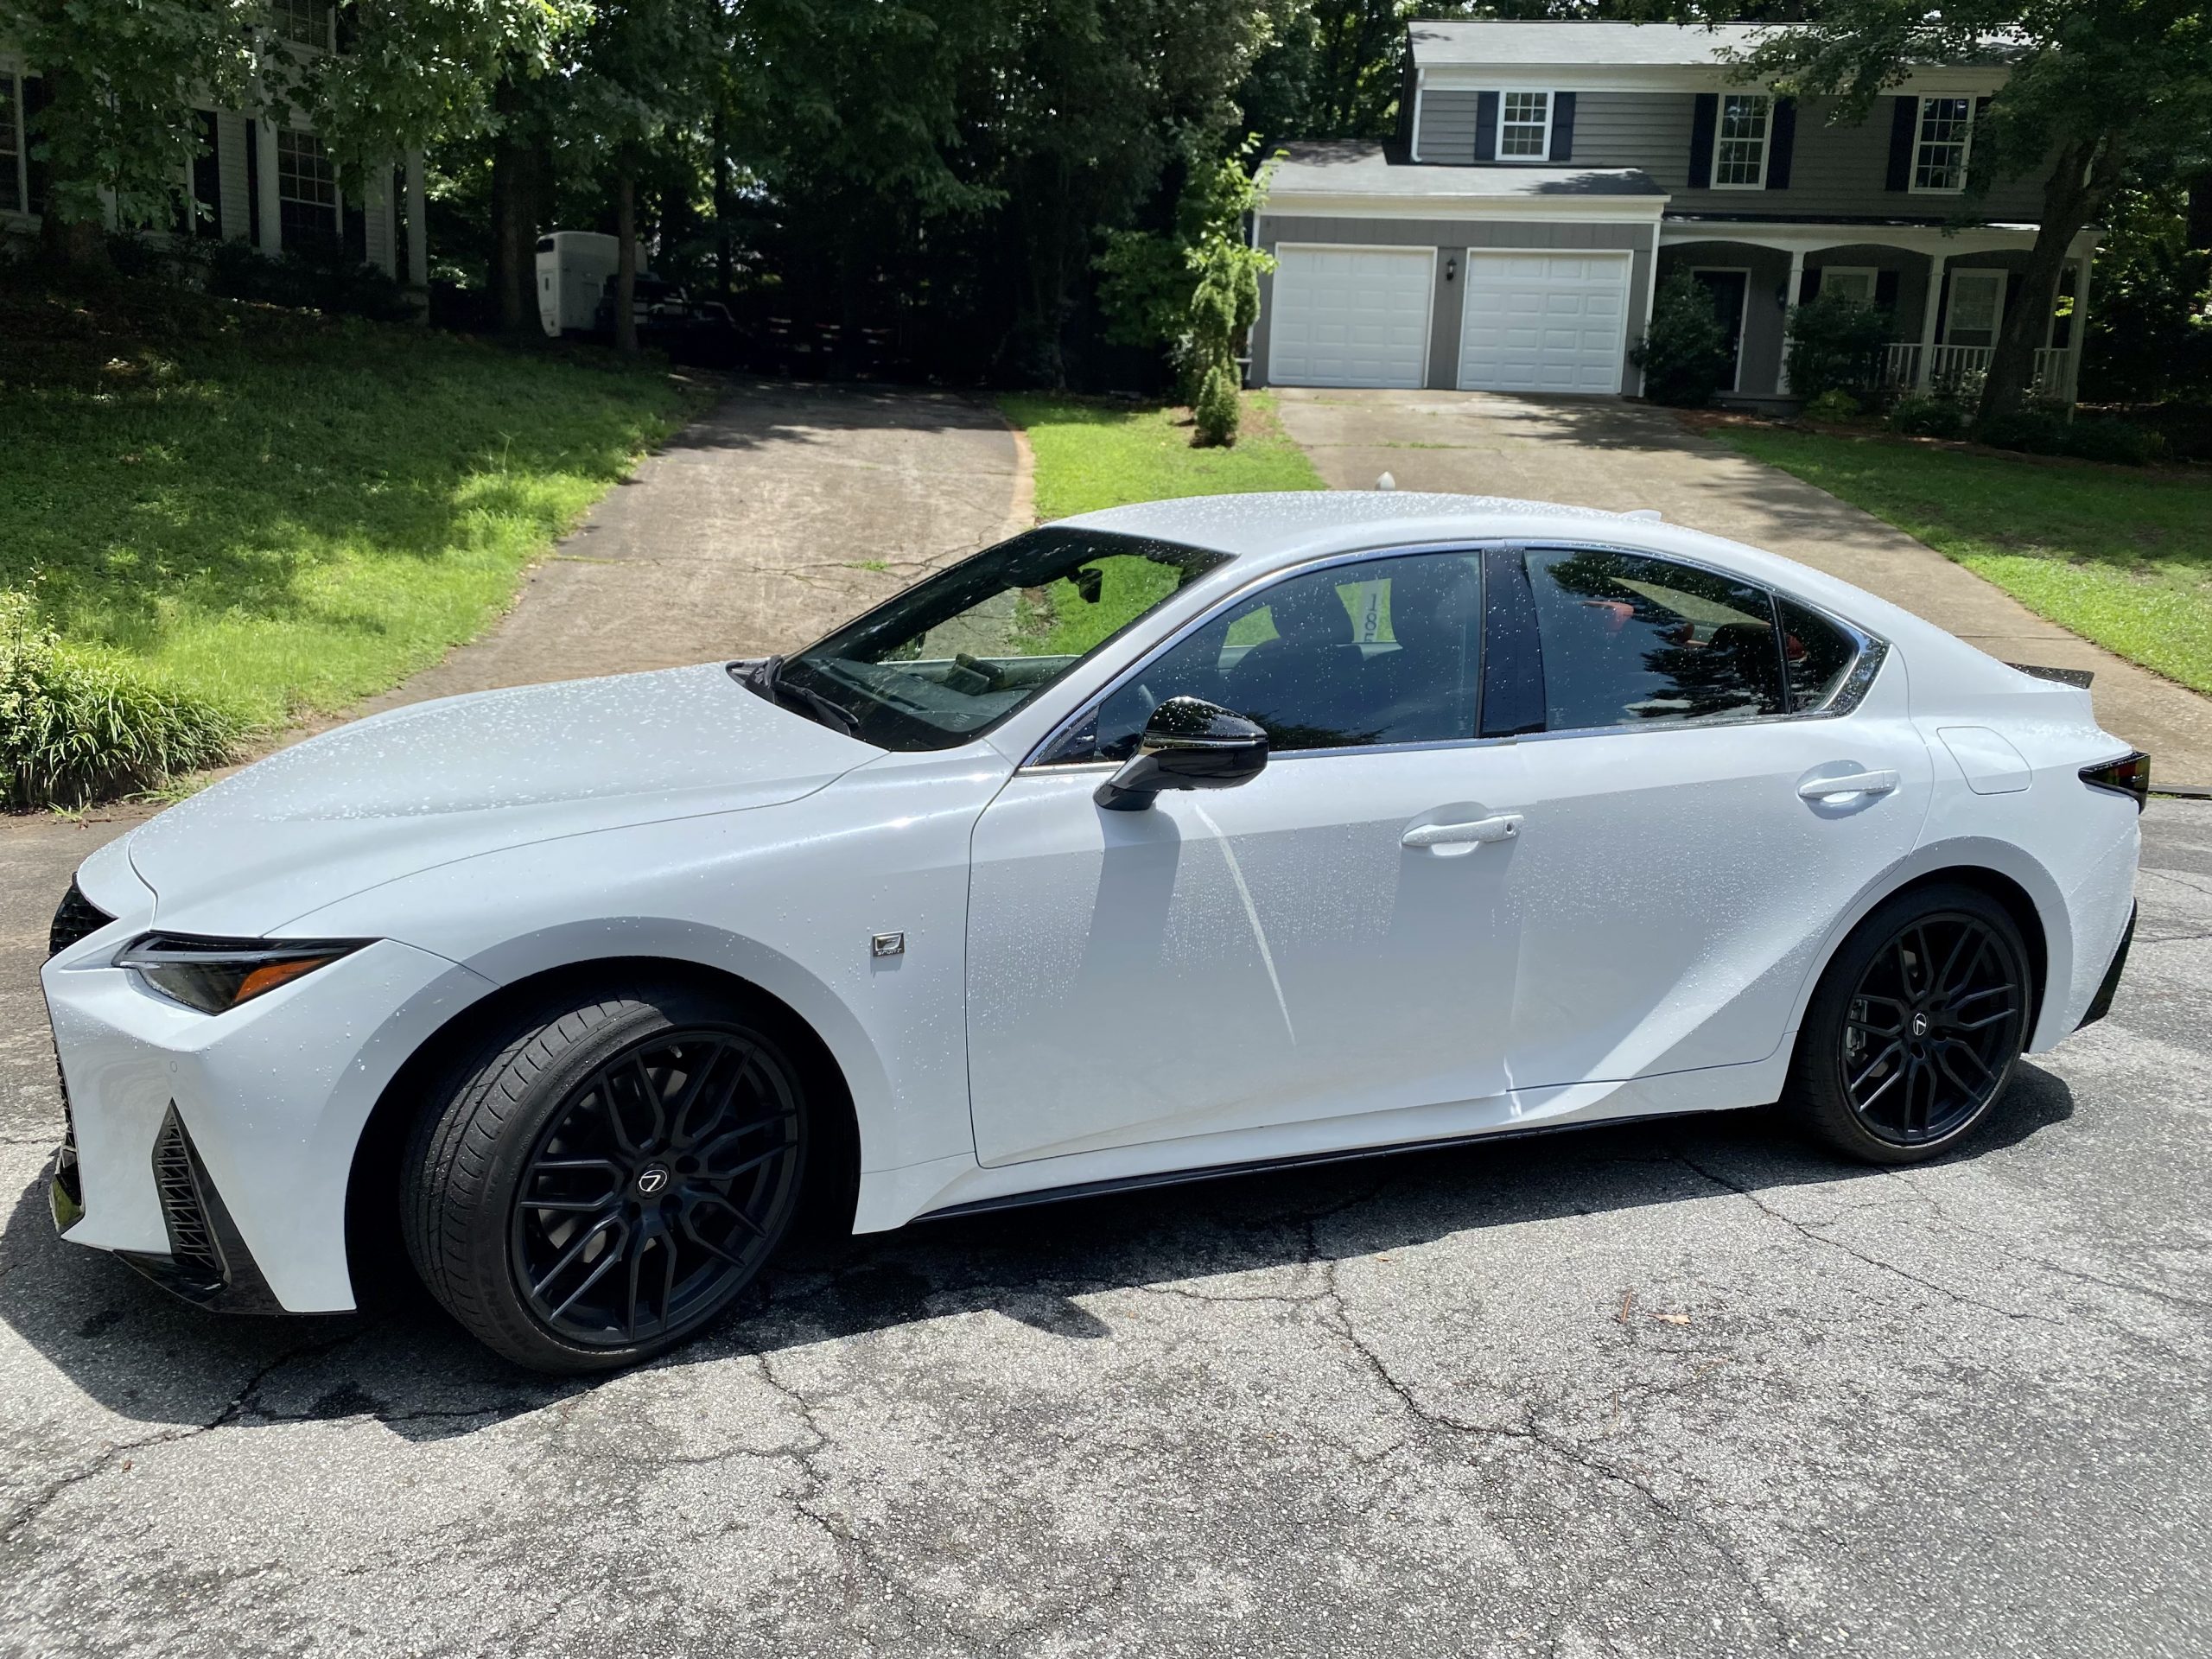 2021 Lexus IS350 F Sport, What A Sexy Ride